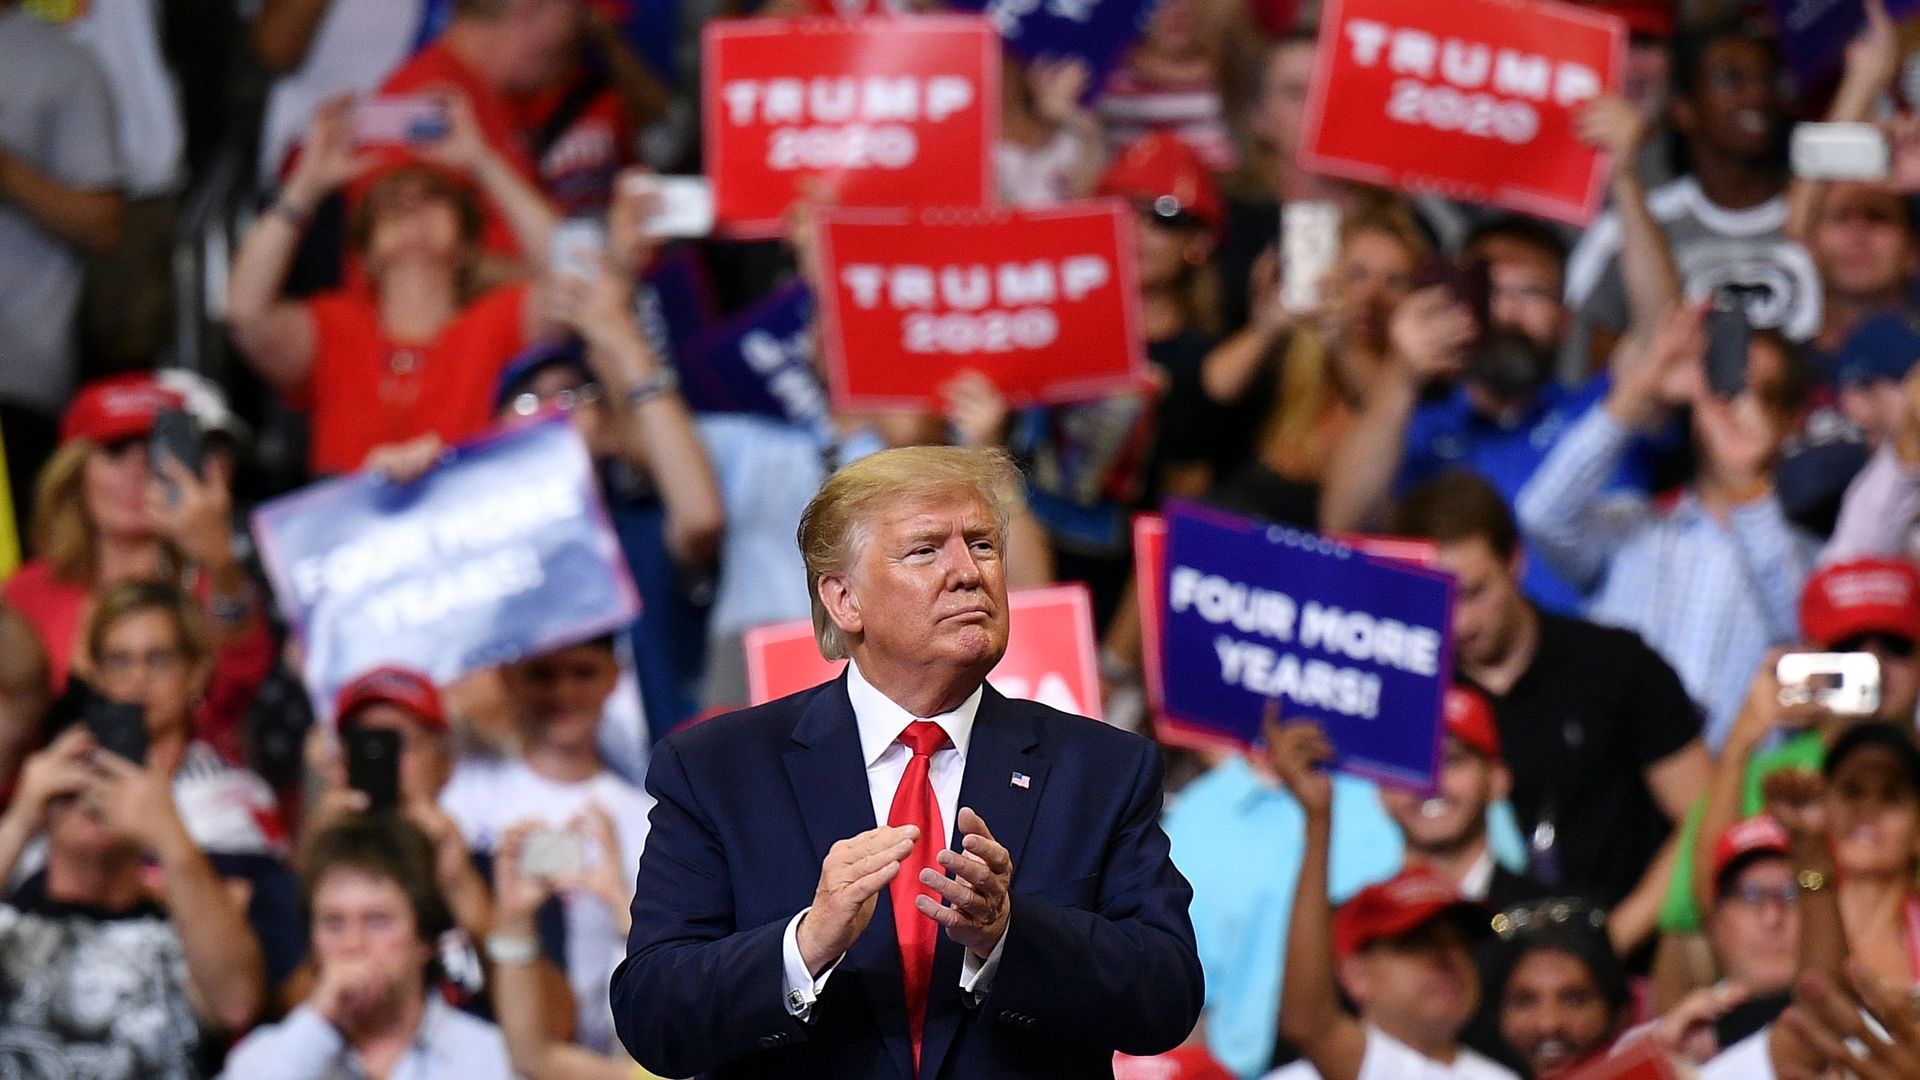 Trump at rally to launch his 2020 campaign.